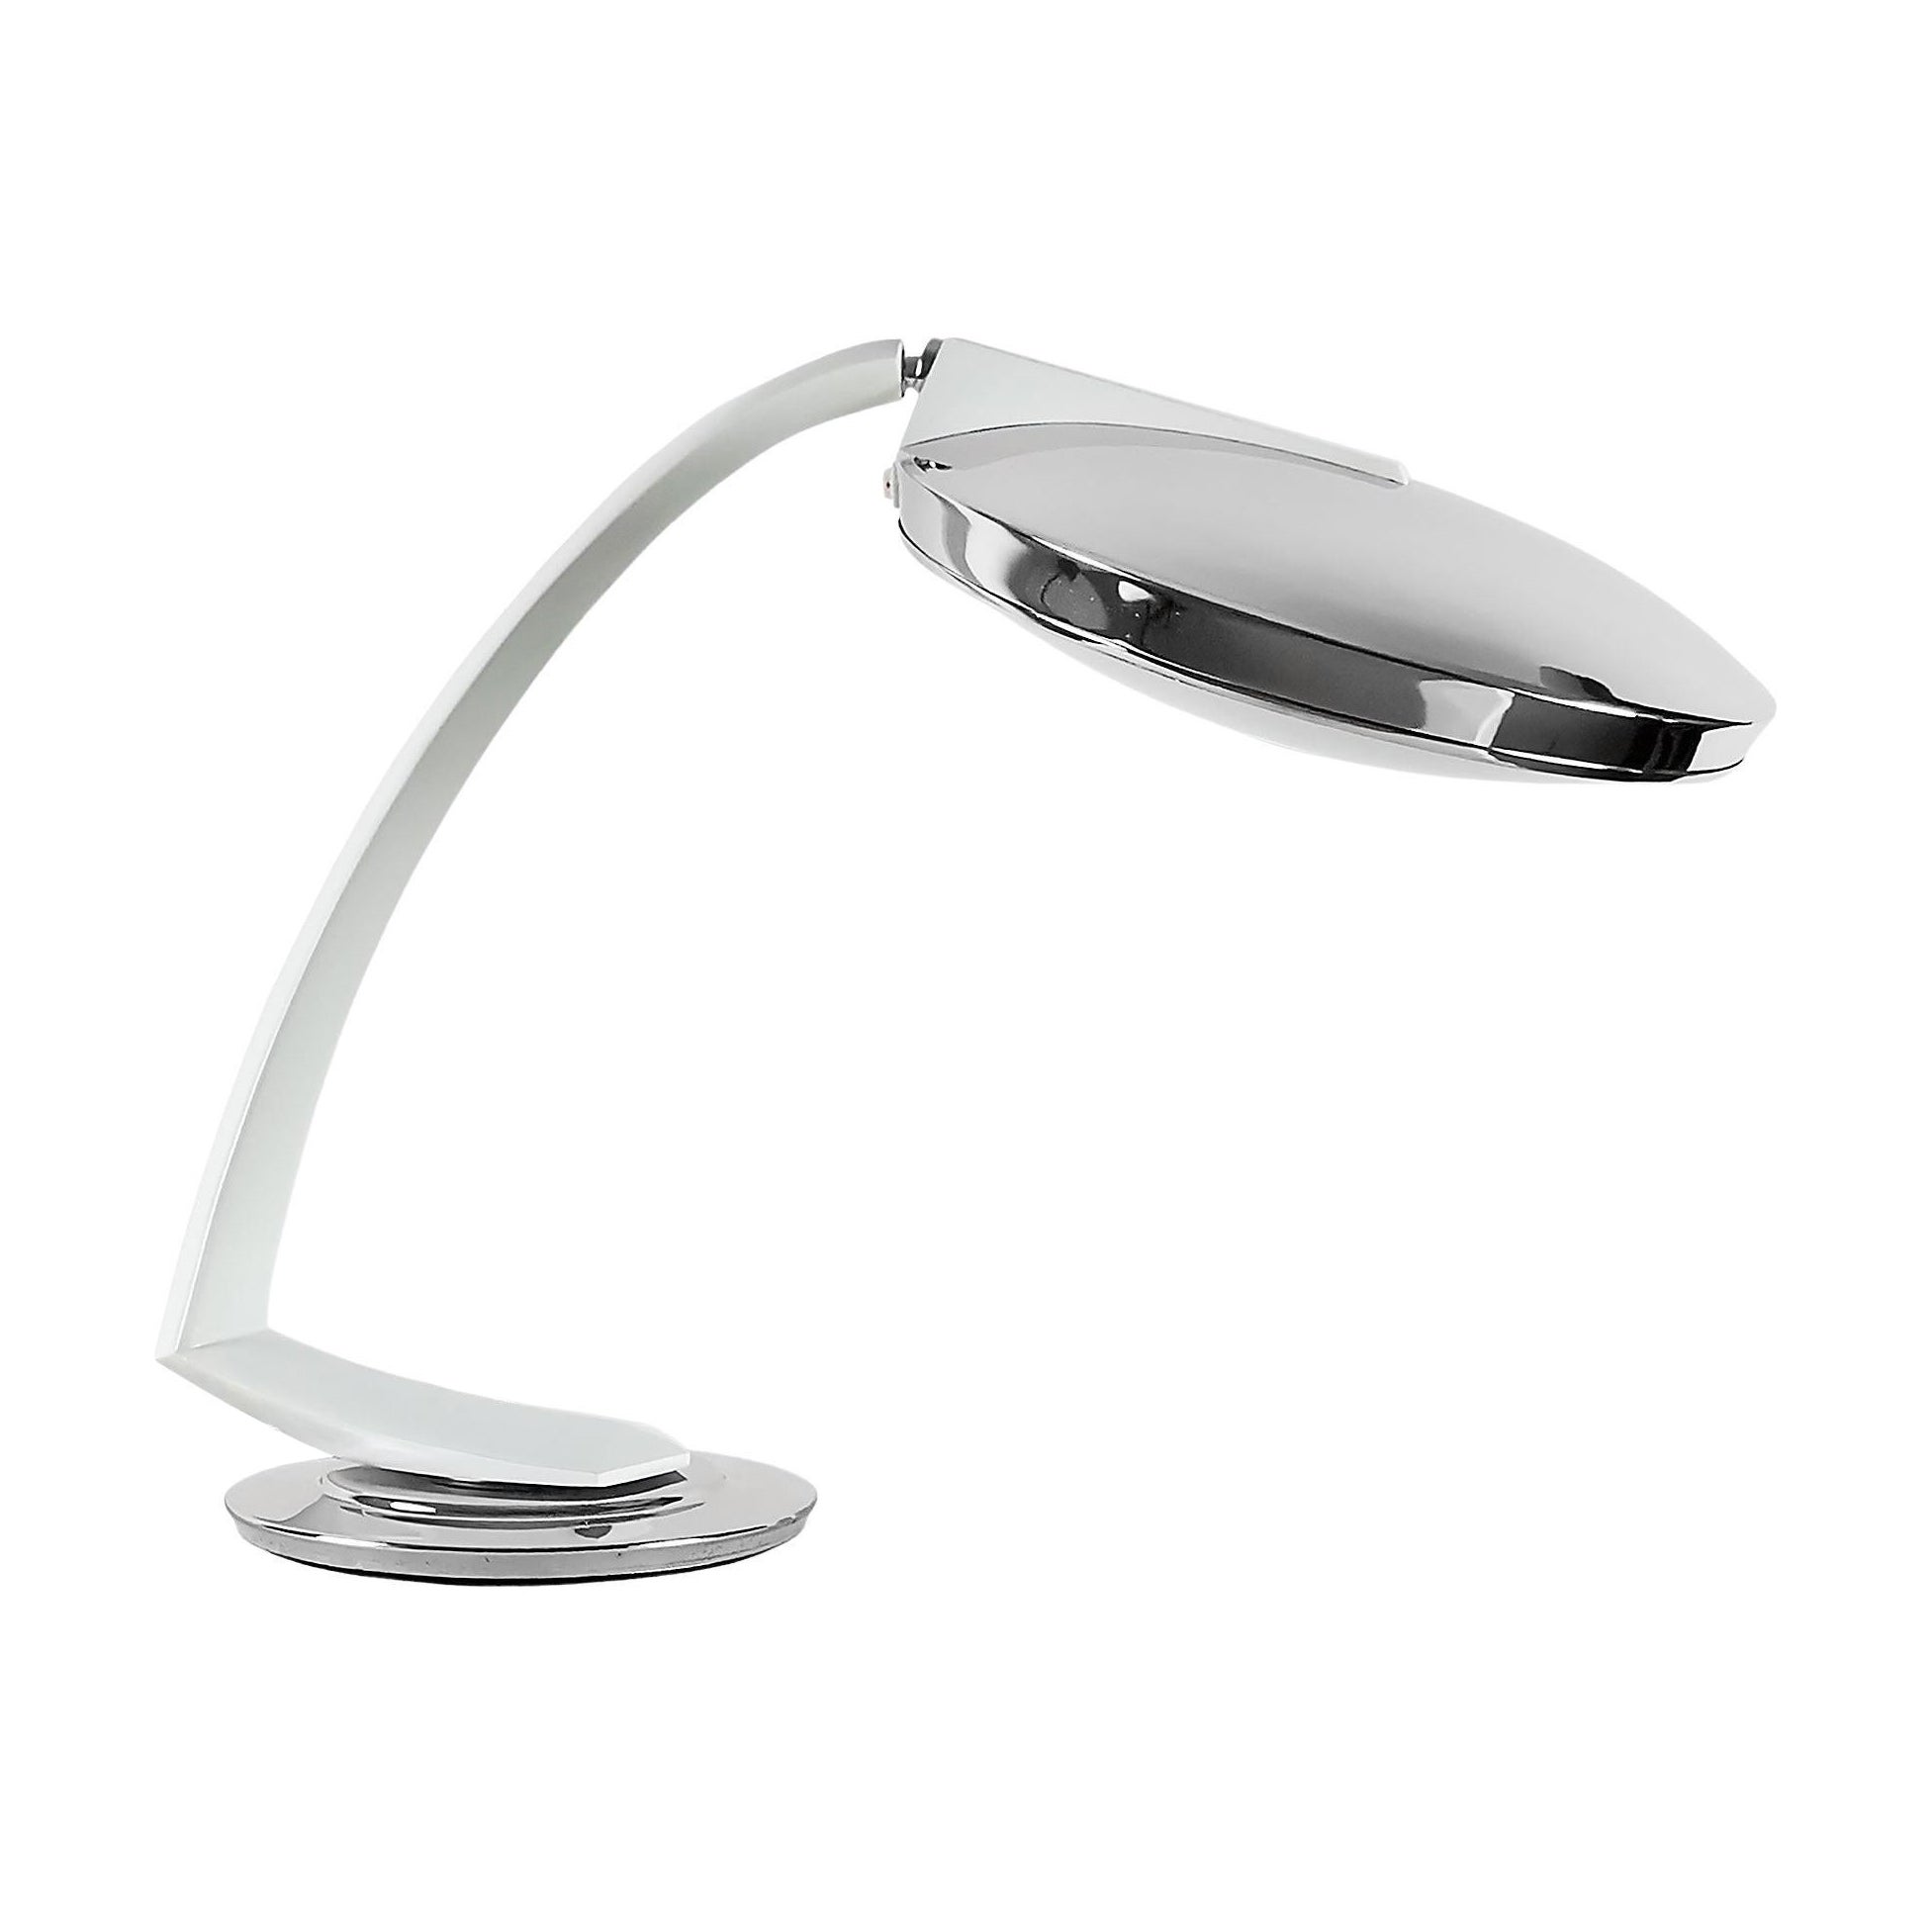 1970's Large "Boomerang" Desk Lamp by Fase, Steel, Frosted Glass - Spain For Sale